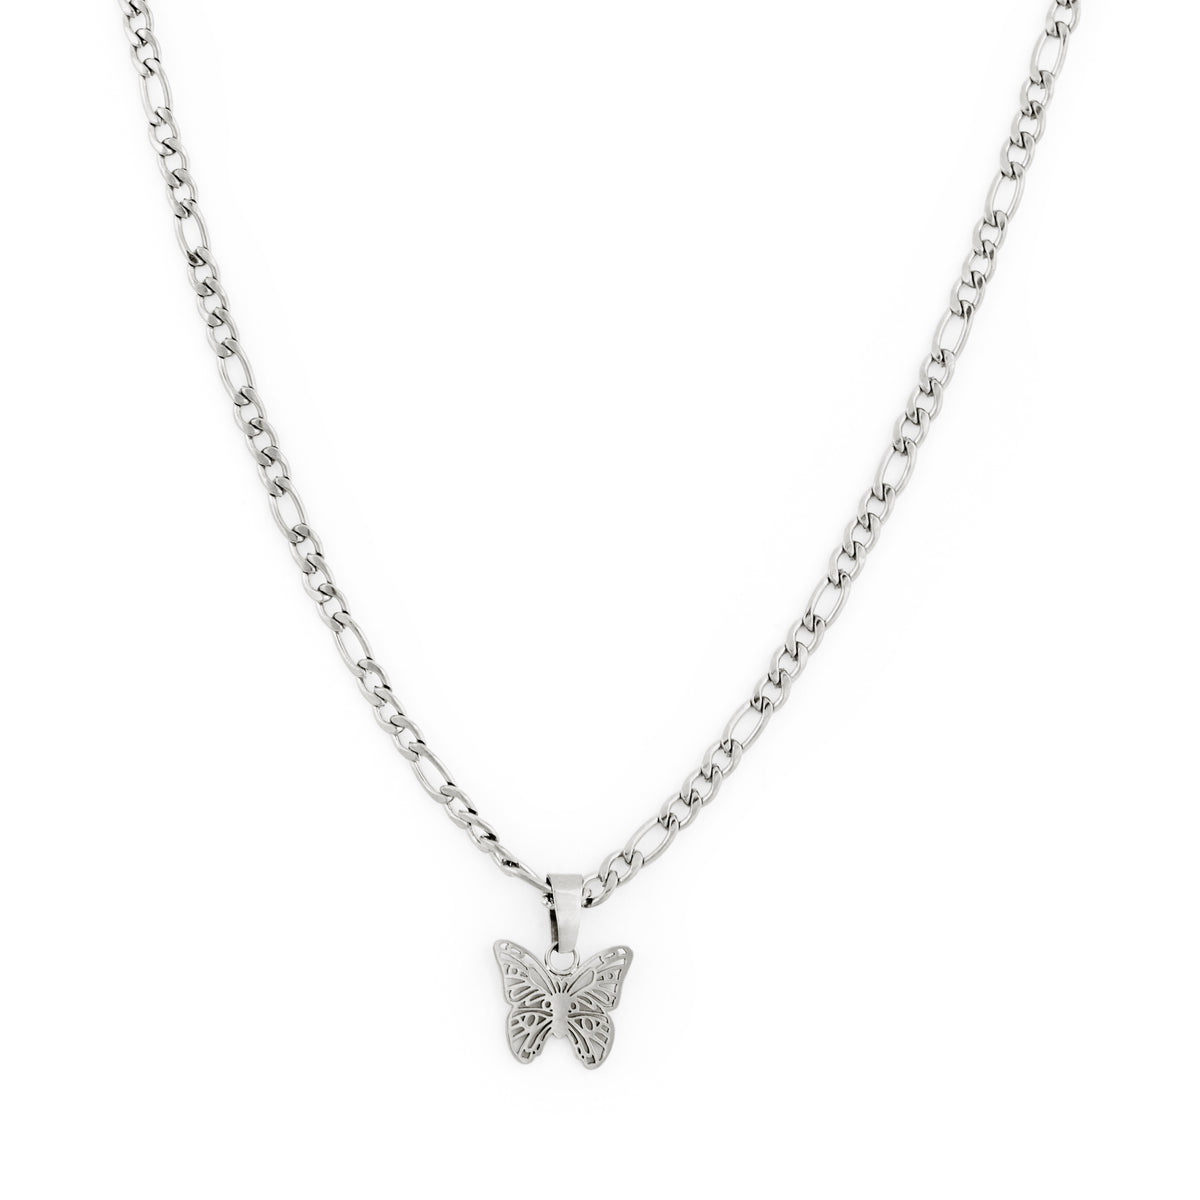 Muse Necklace - Silver